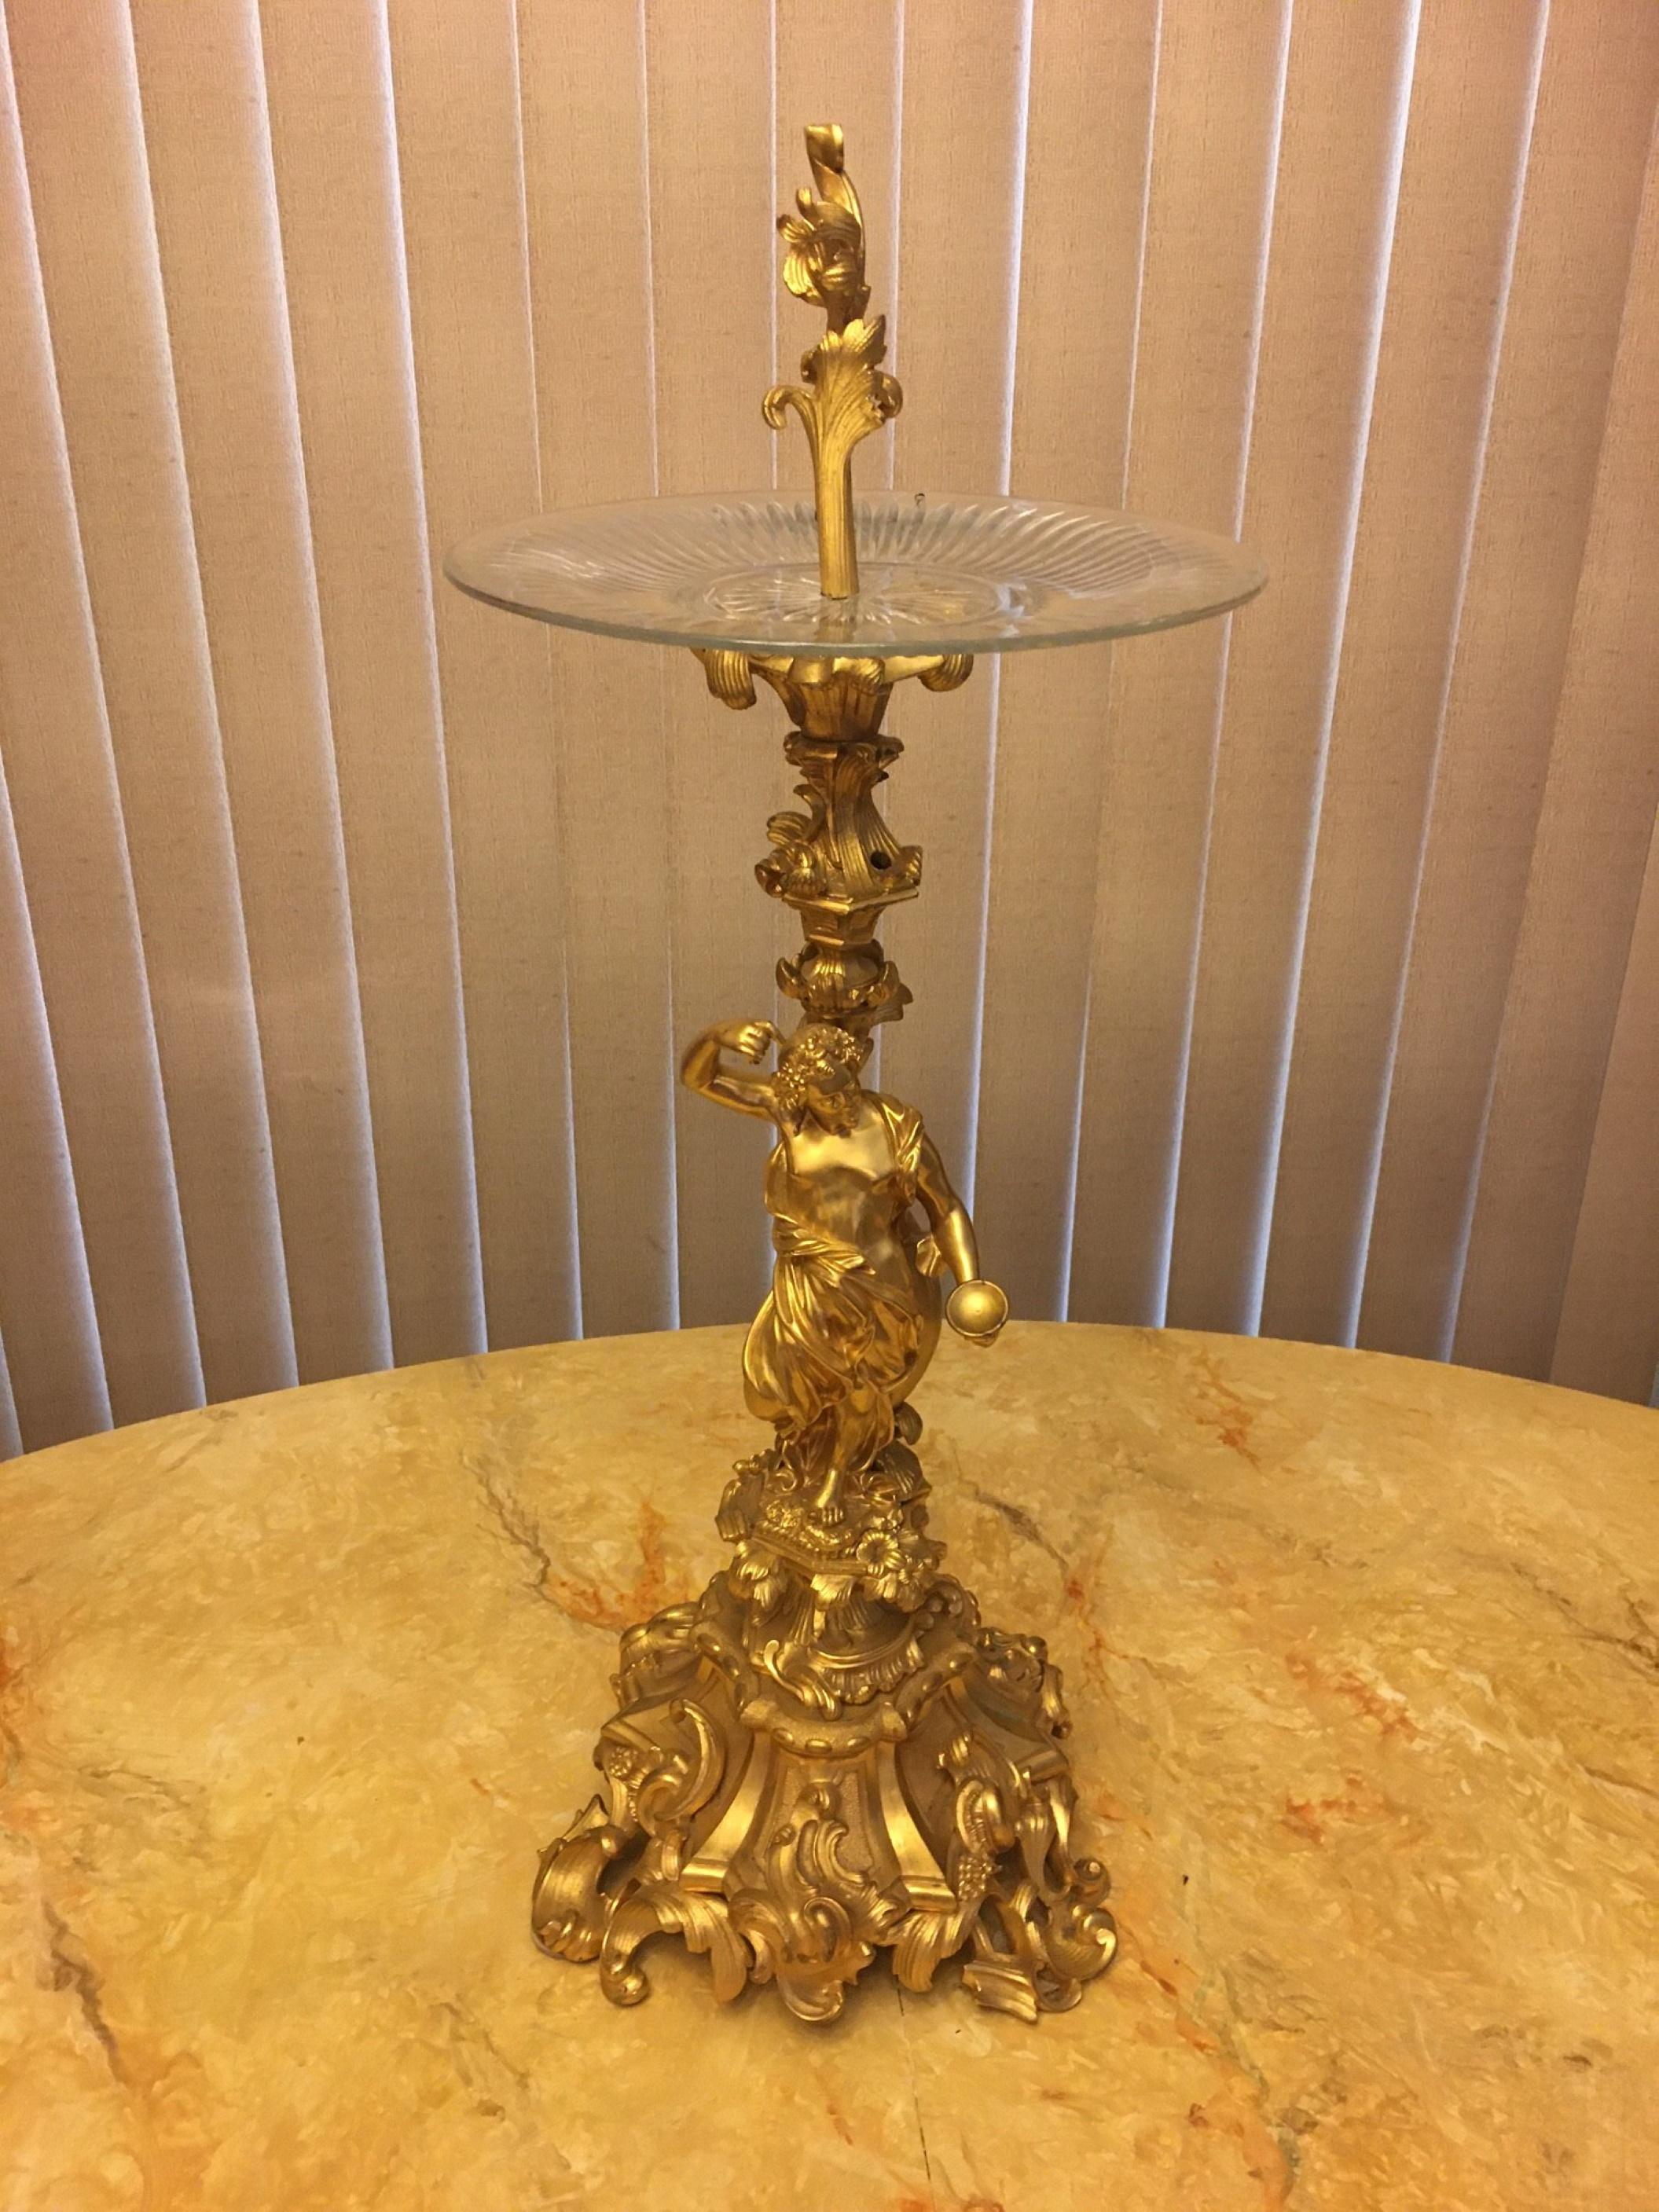 Large French 19th Century Louis XVI Style Bronze Ormolu Presentoir Centerpiece.

High quality French 19th century Louis XVI style bronze ormolu presentoir centerpiece. Raised on the most decorative pierced scrolled foliate base is a beautiful